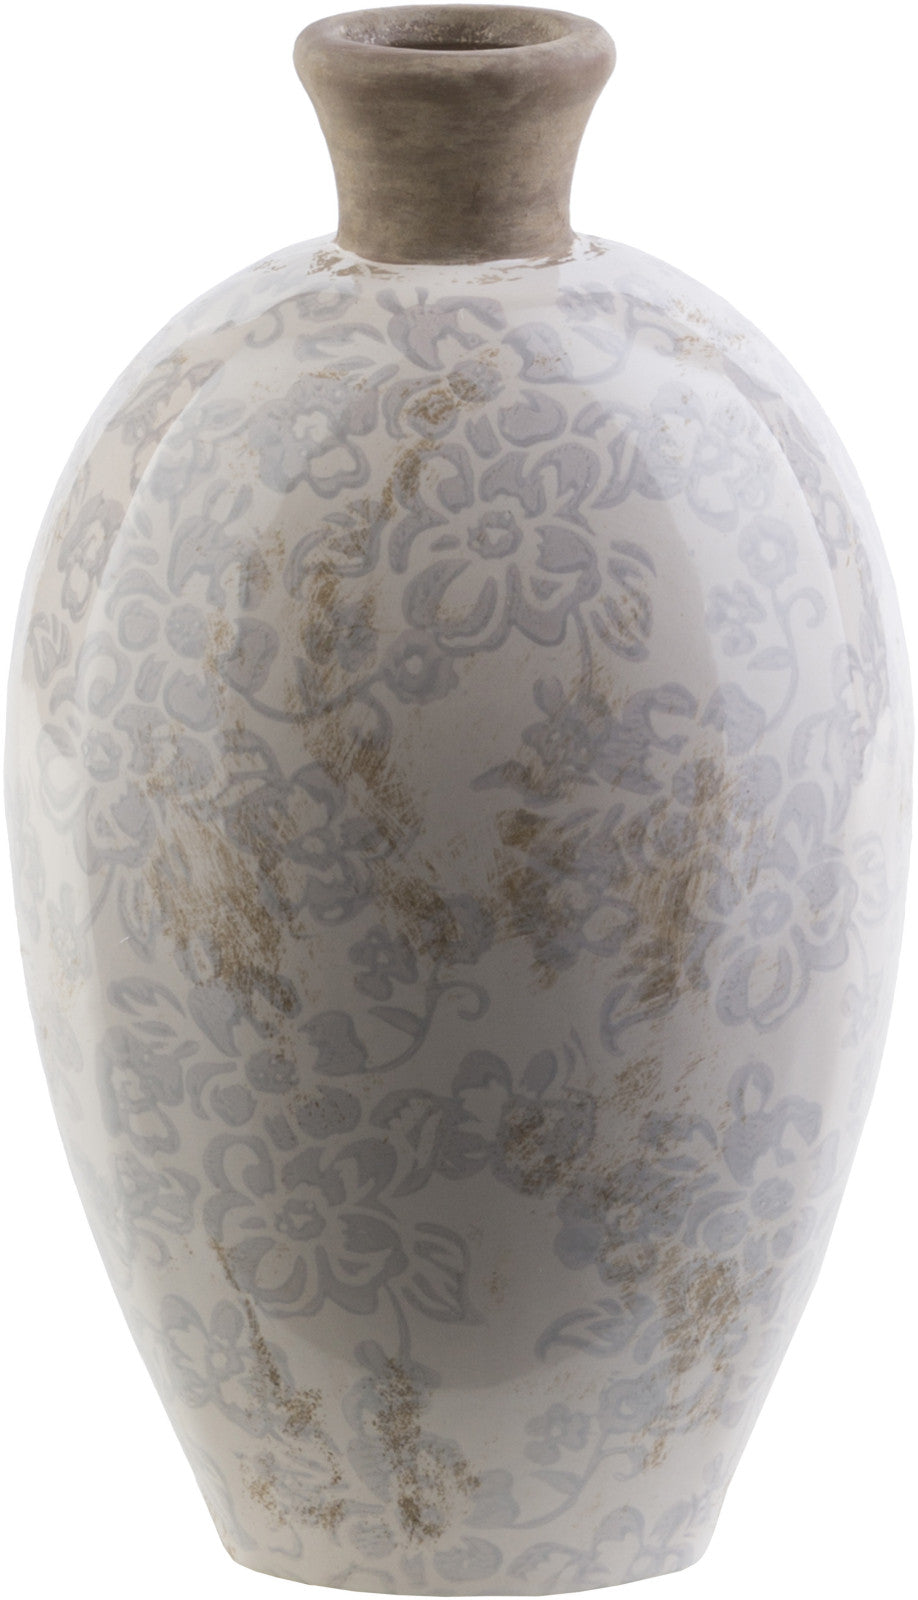 Surya Leclair LCL-609 Vase Small 5.91 X 5.12 X 10.43 inches